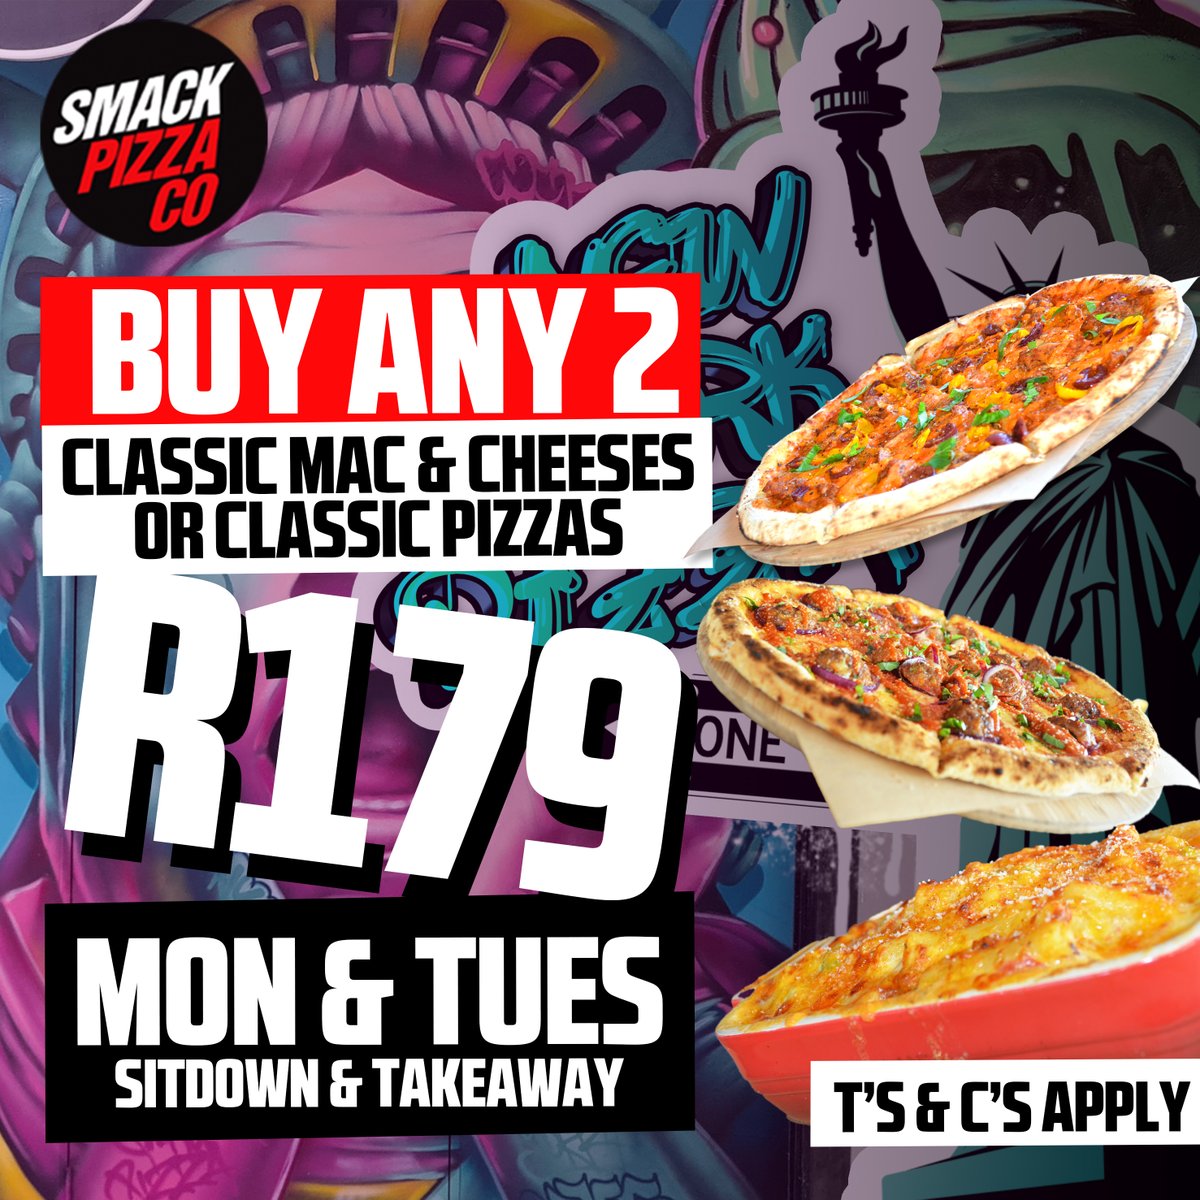 SMACK ATTACK MONDAYS & TUESDAYS!
Buy any 2 Classic Pizzas or Mac and Cheese ONLY for R179!

📷Classic
📷Rustic Classic
📷Chicken
📷Pepperoni
📷Smoke ‘n Shrooms
📷Hawaiian
📷The Greek (Vegetarian)
📷Buzz Kill
📷Johnny Apple Pie

#Smack #pizza #tuesdayspecial #mondayspecial #cheese